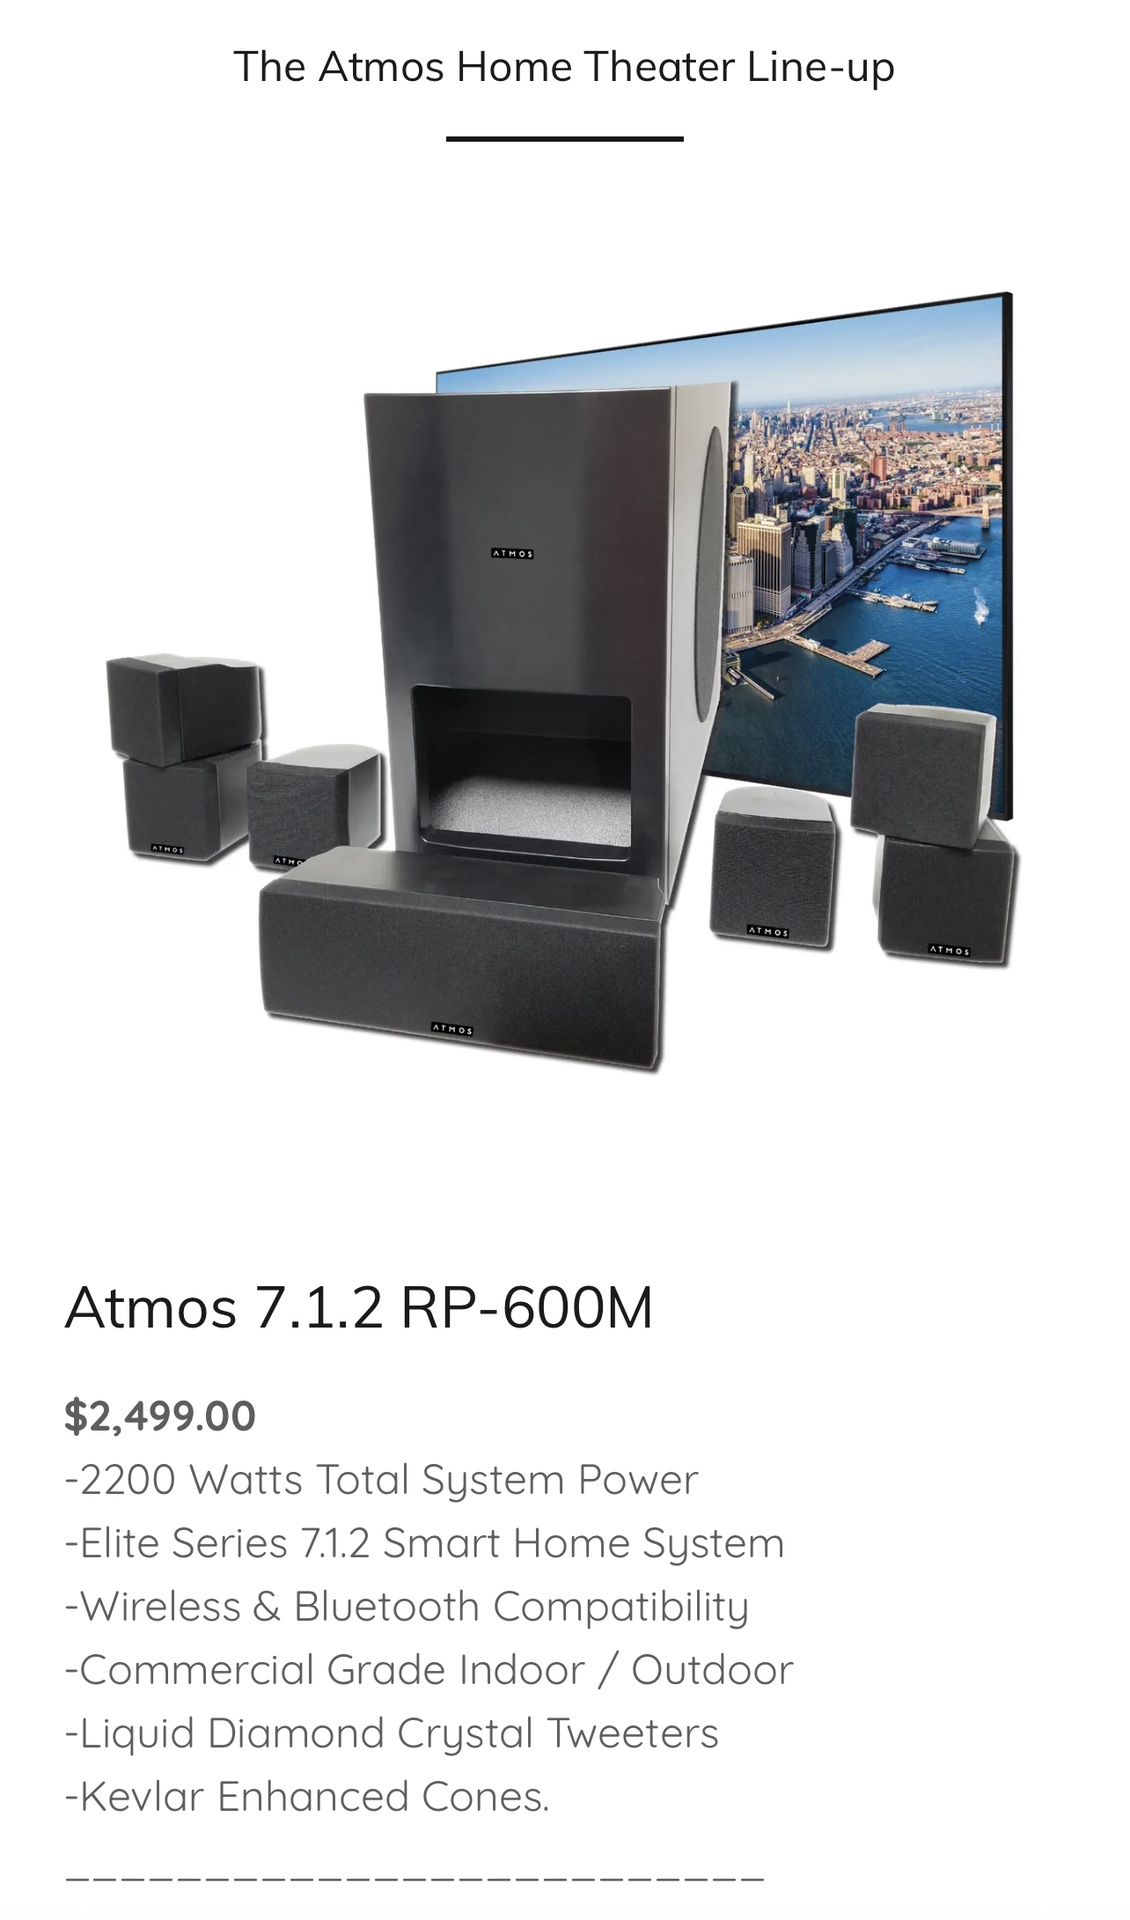 Atmos Home Theater 7.1.2